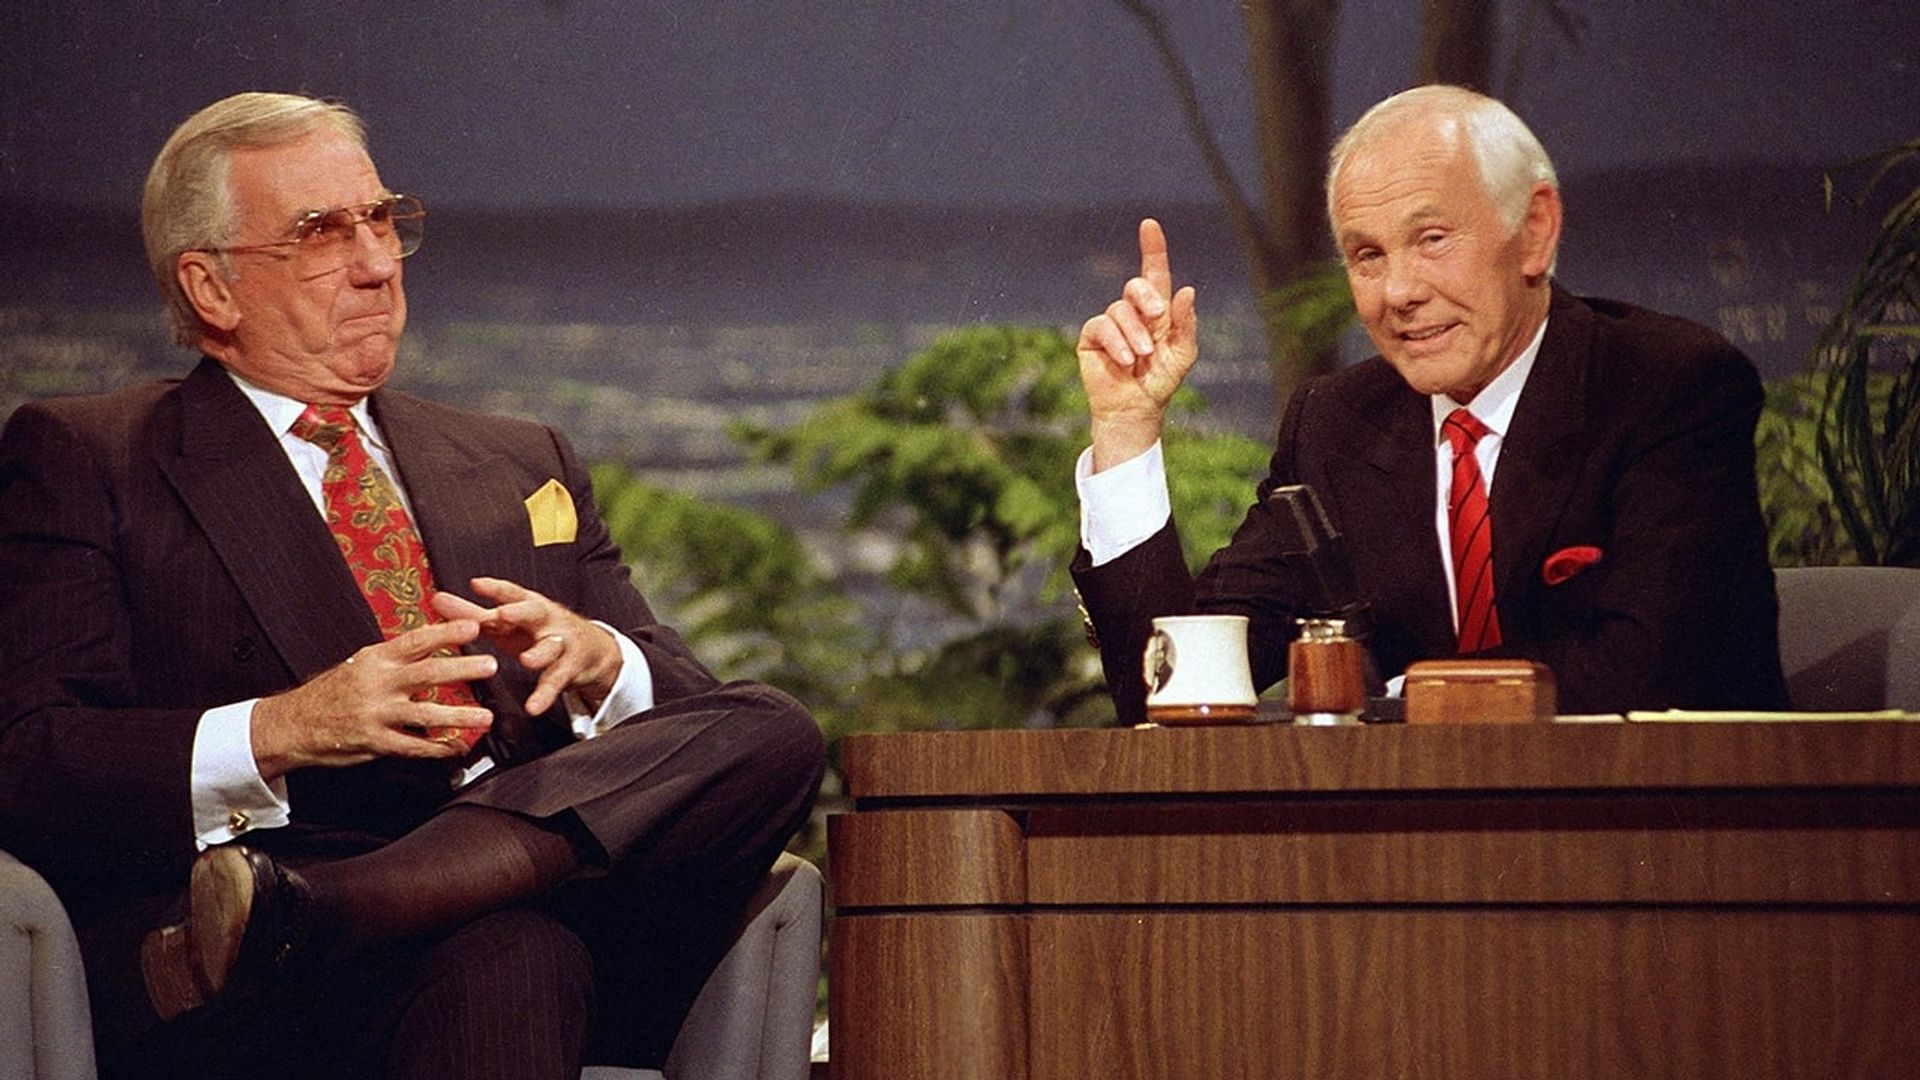 The Tonight Show Starring Johnny Carson background